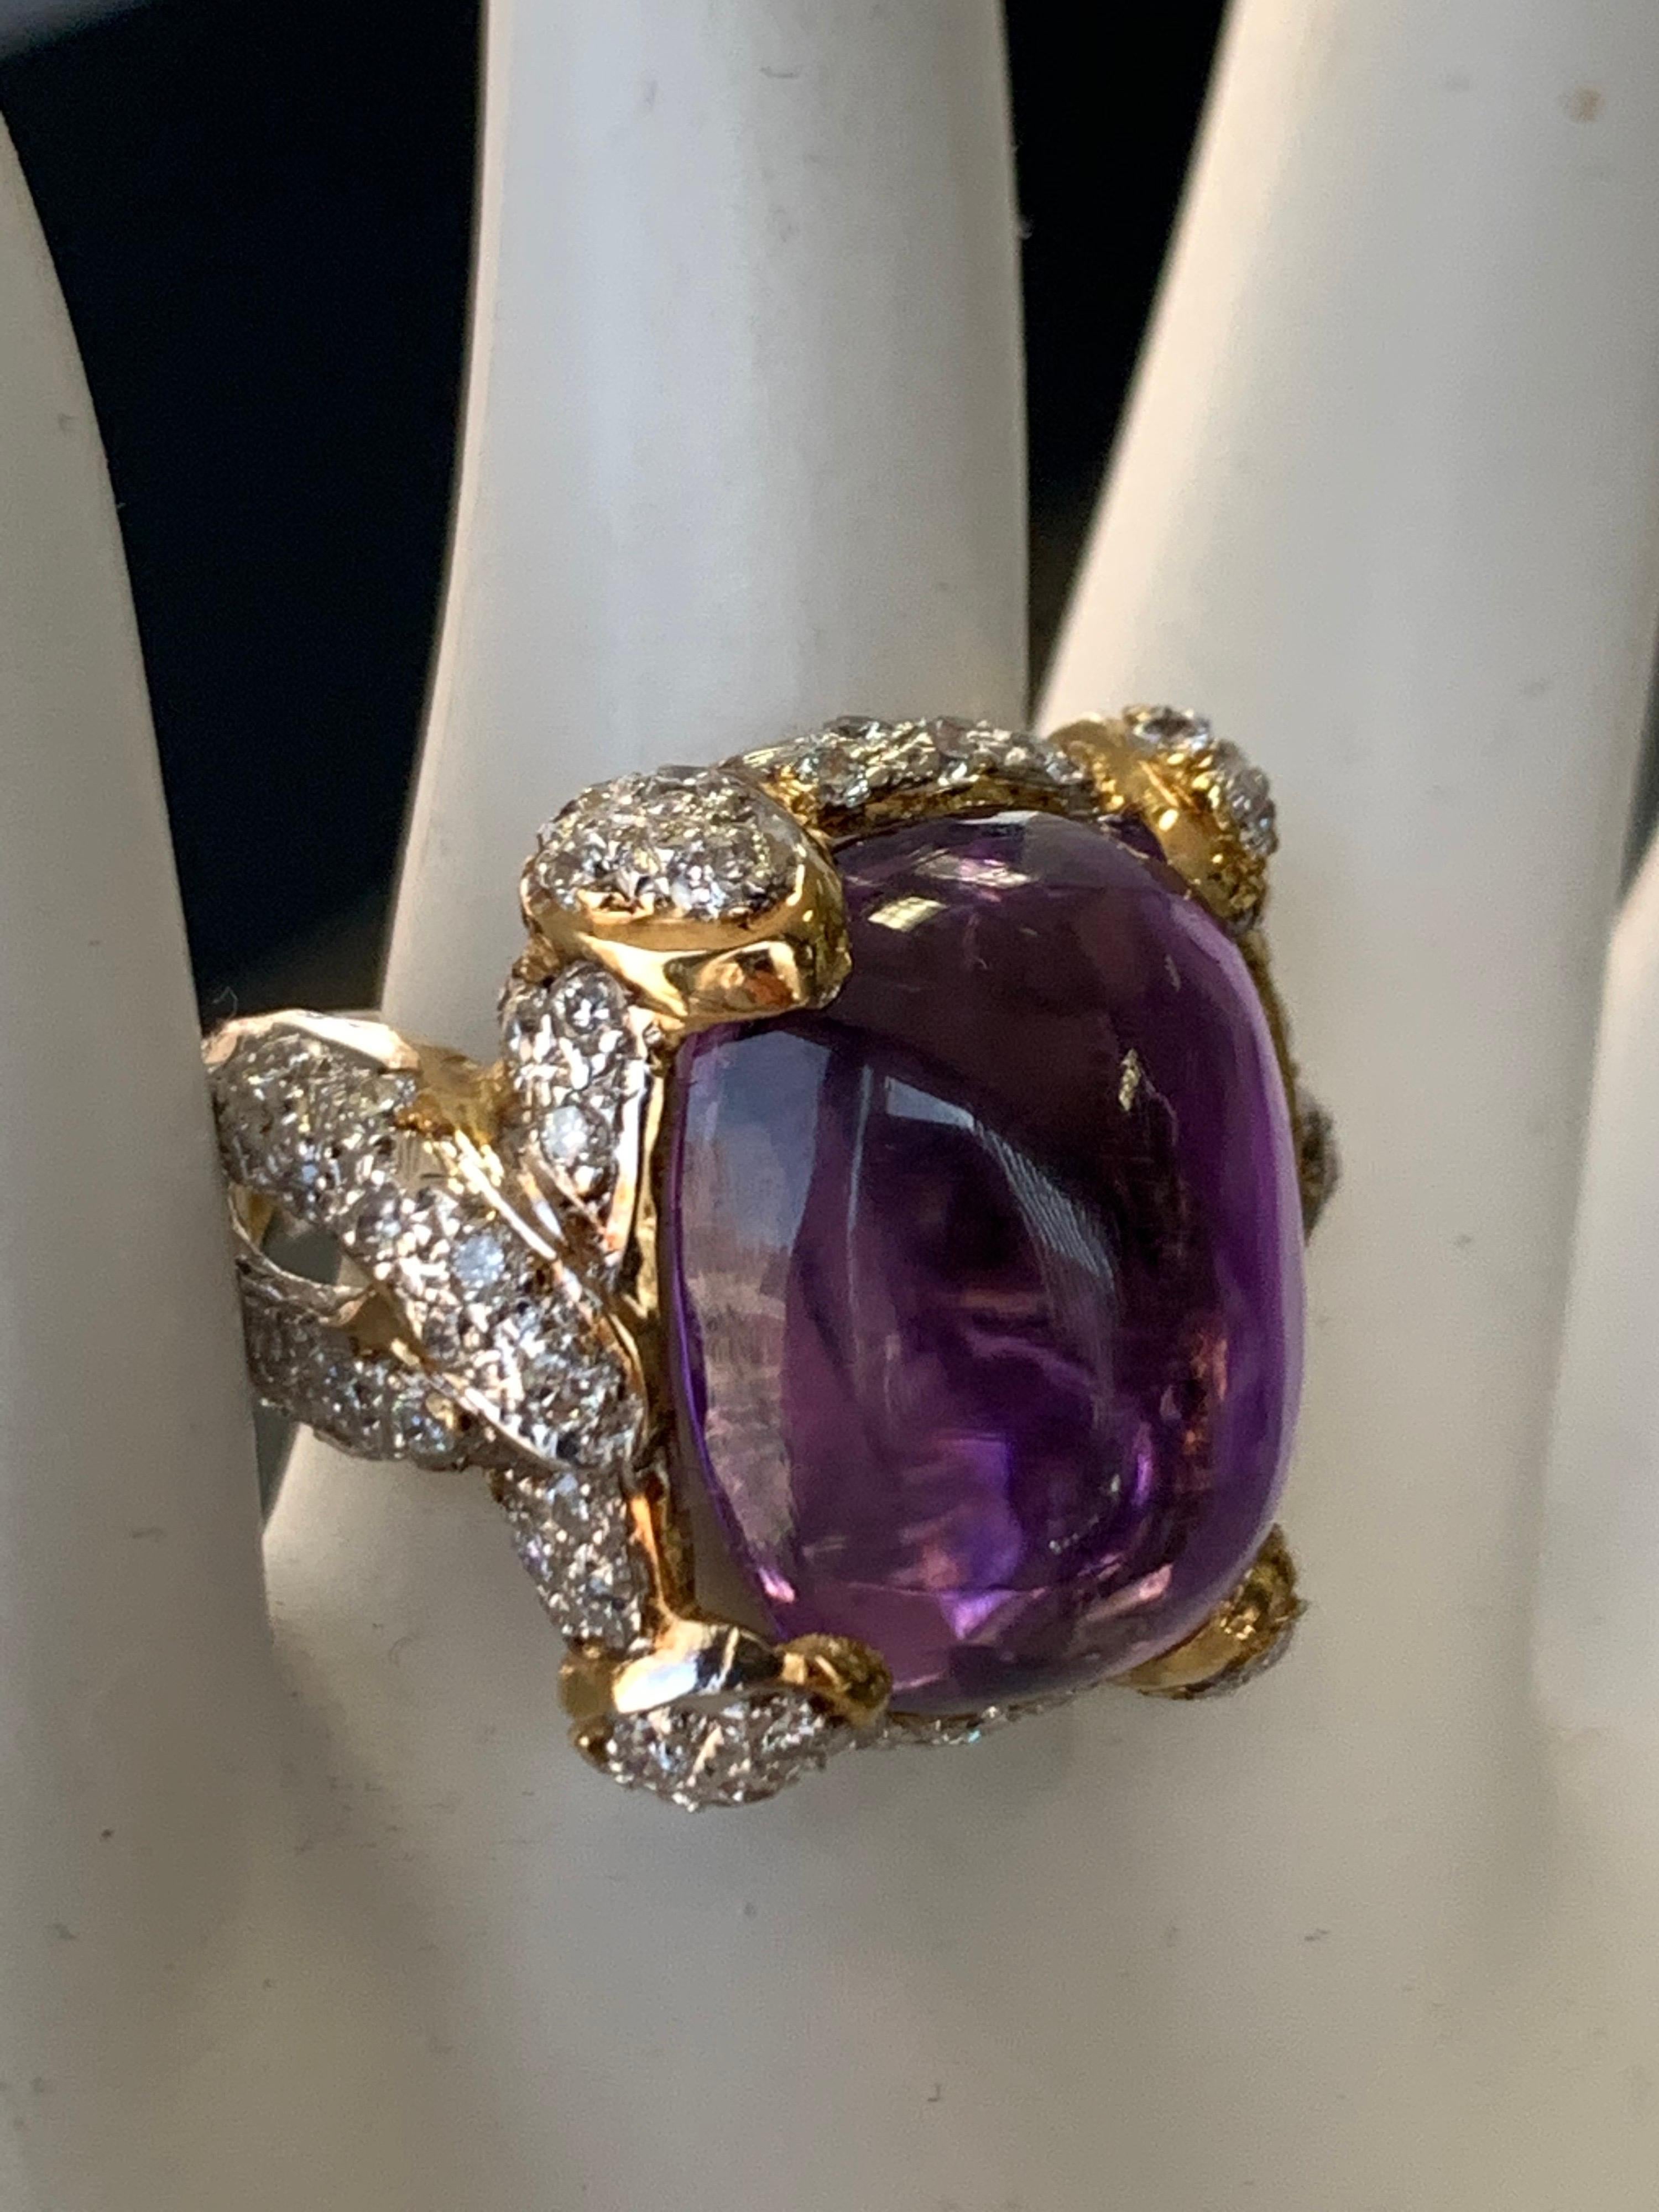 21.68 Carat Retro Gold Cocktail Ring Natural Diamond and Cab Amethyst circa 1960 For Sale 3